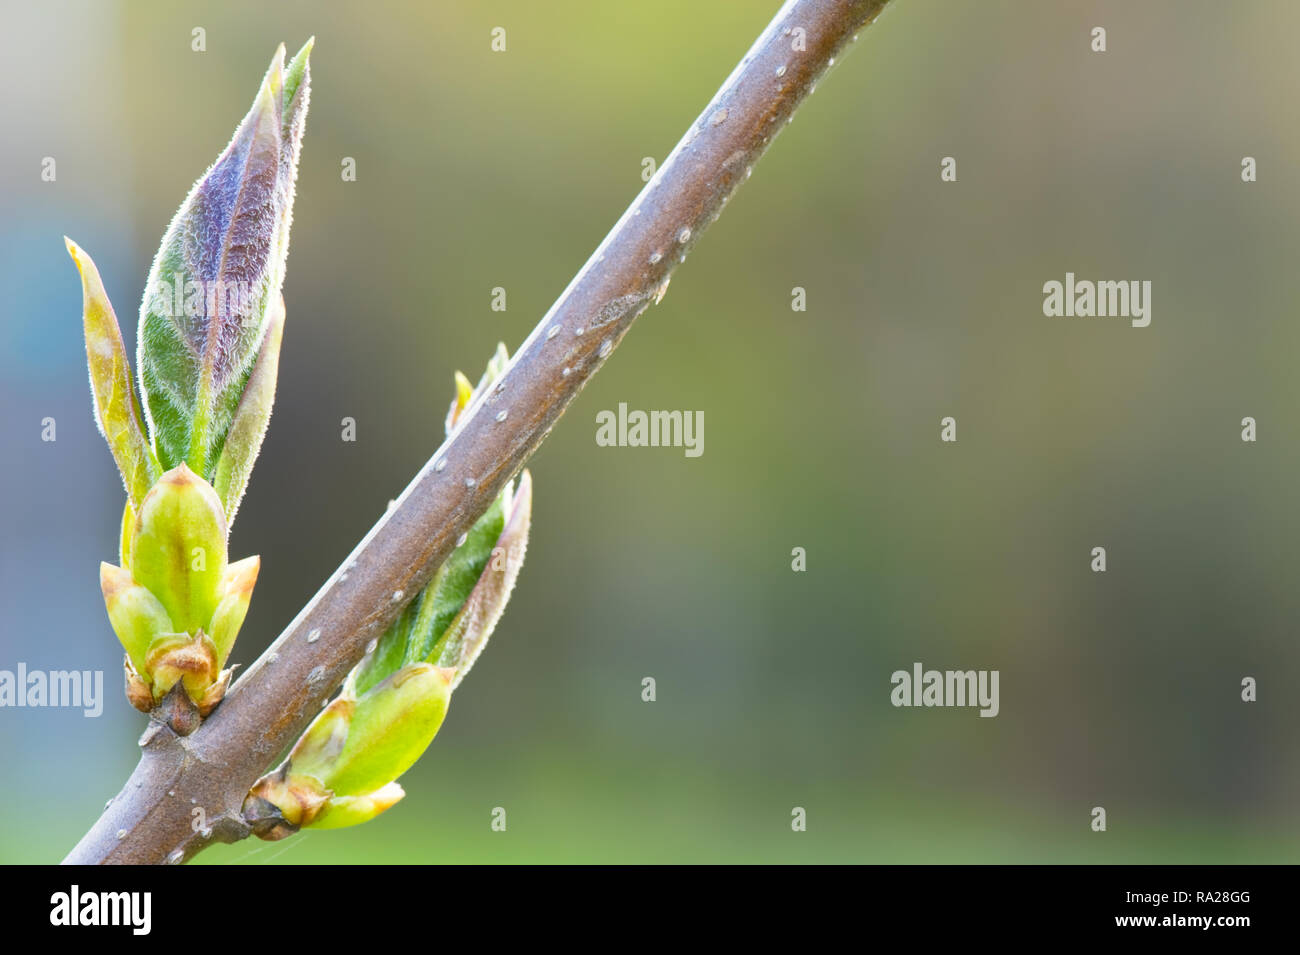 Lilac (Syringa x henryi) budding leaves in spring. Selective focus and shallow depth of field. Stock Photo